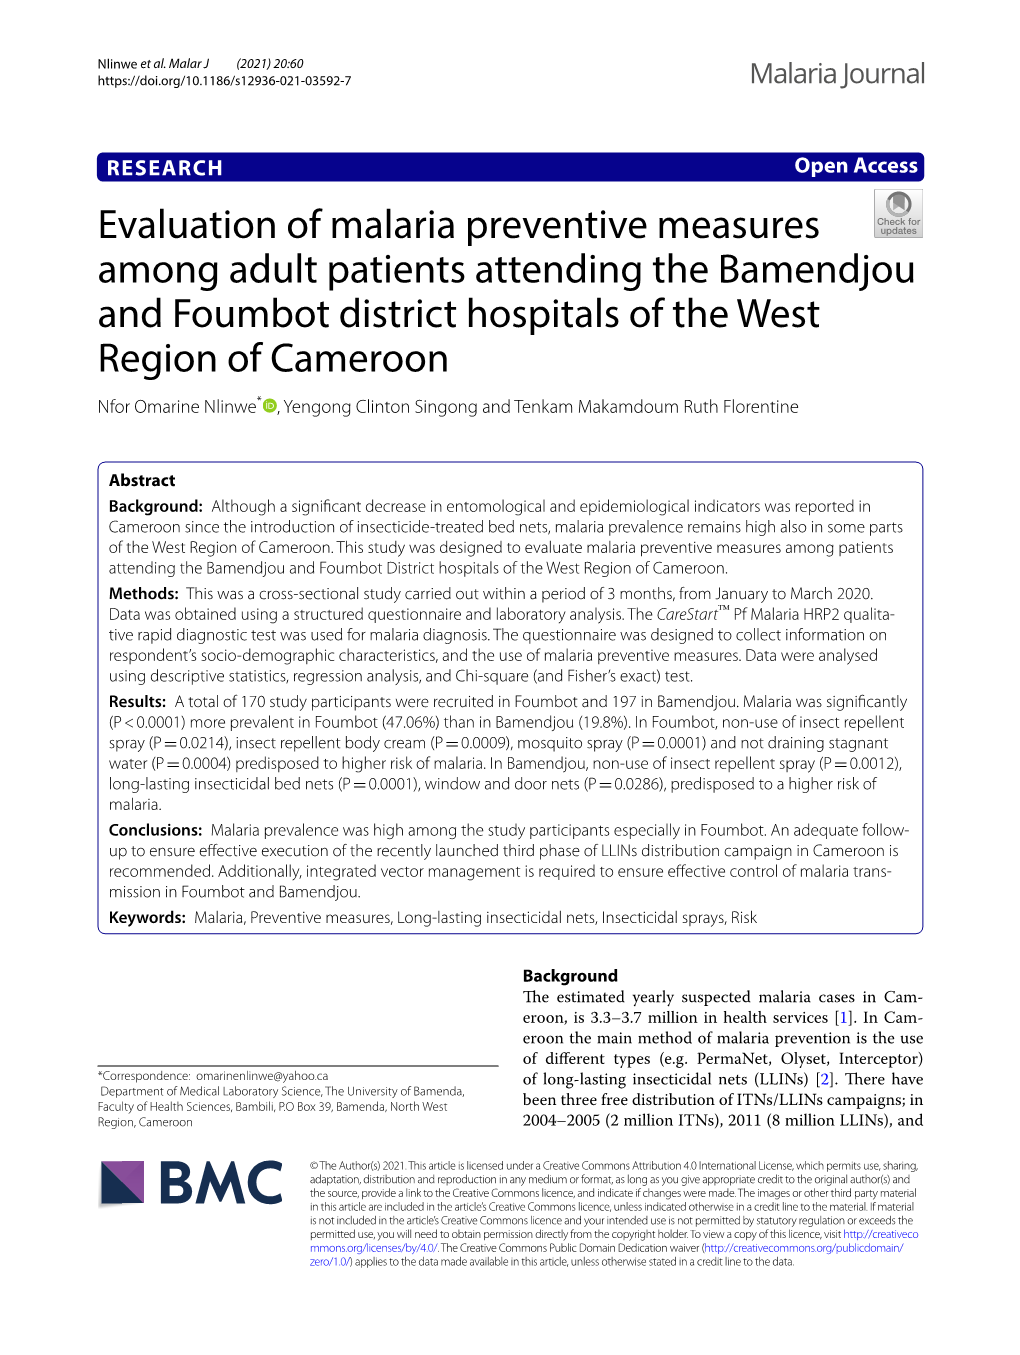 Evaluation of Malaria Preventive Measures Among